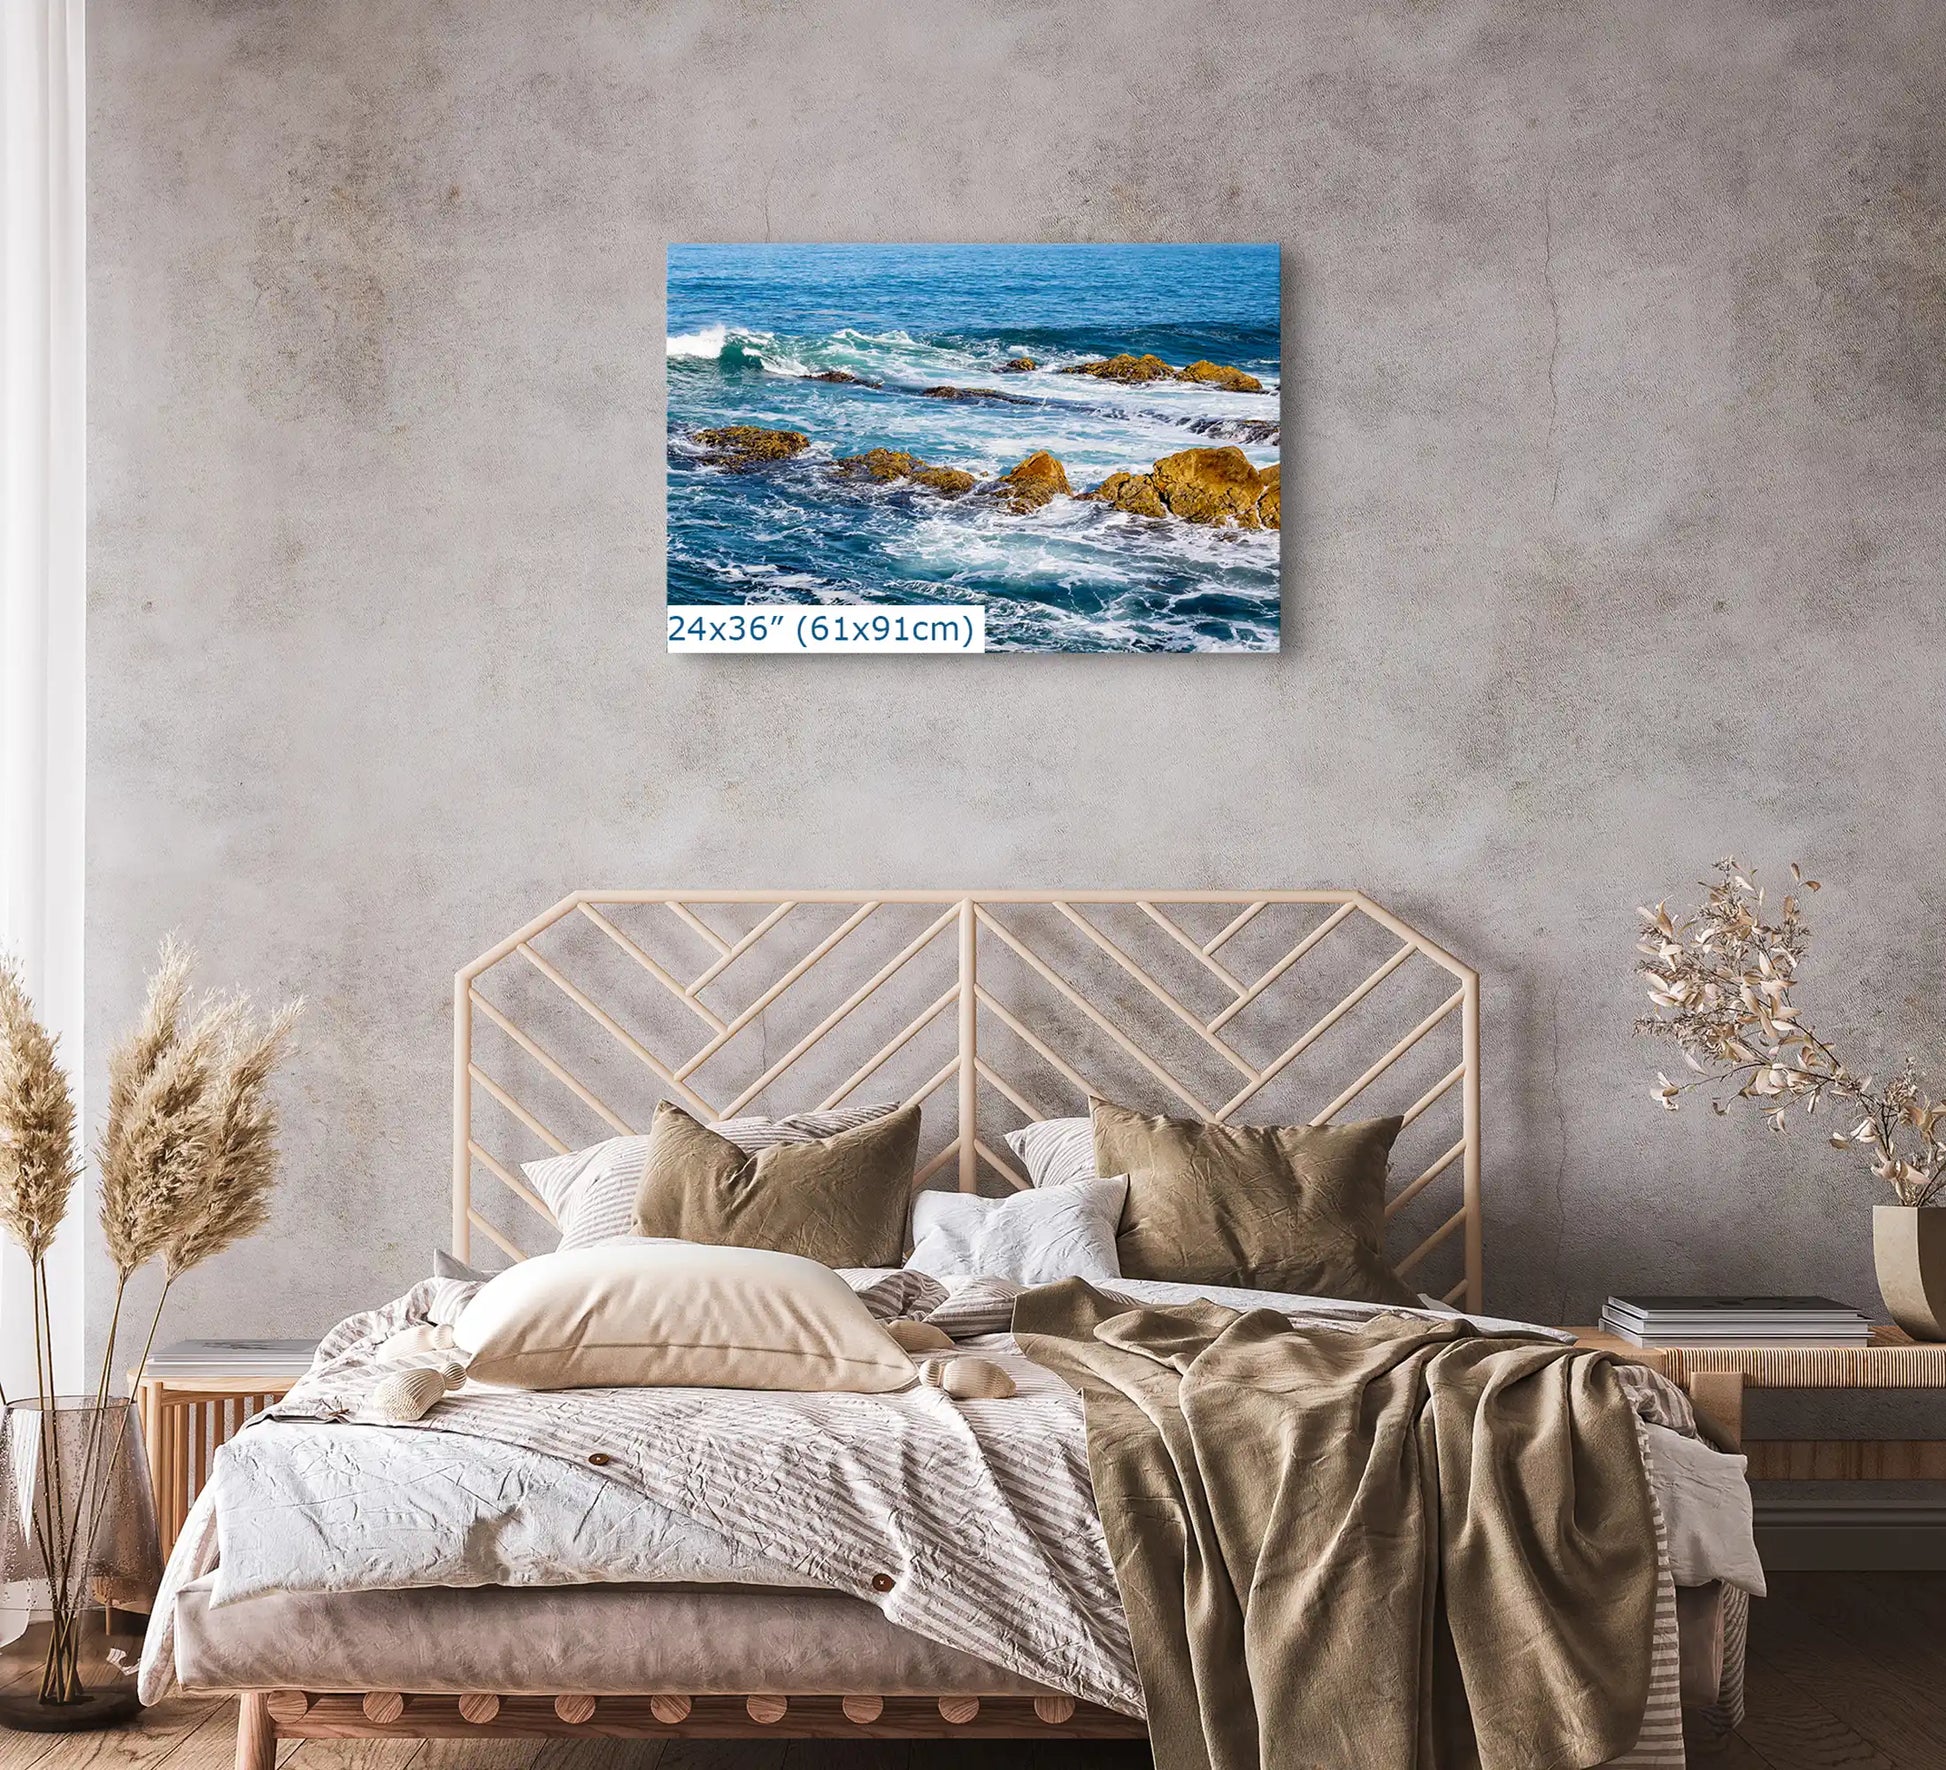 A 24"x36" canvas of the ocean scene prominently displayed above a bed with neutral bedding in a bedroom with a rustic aesthetic.